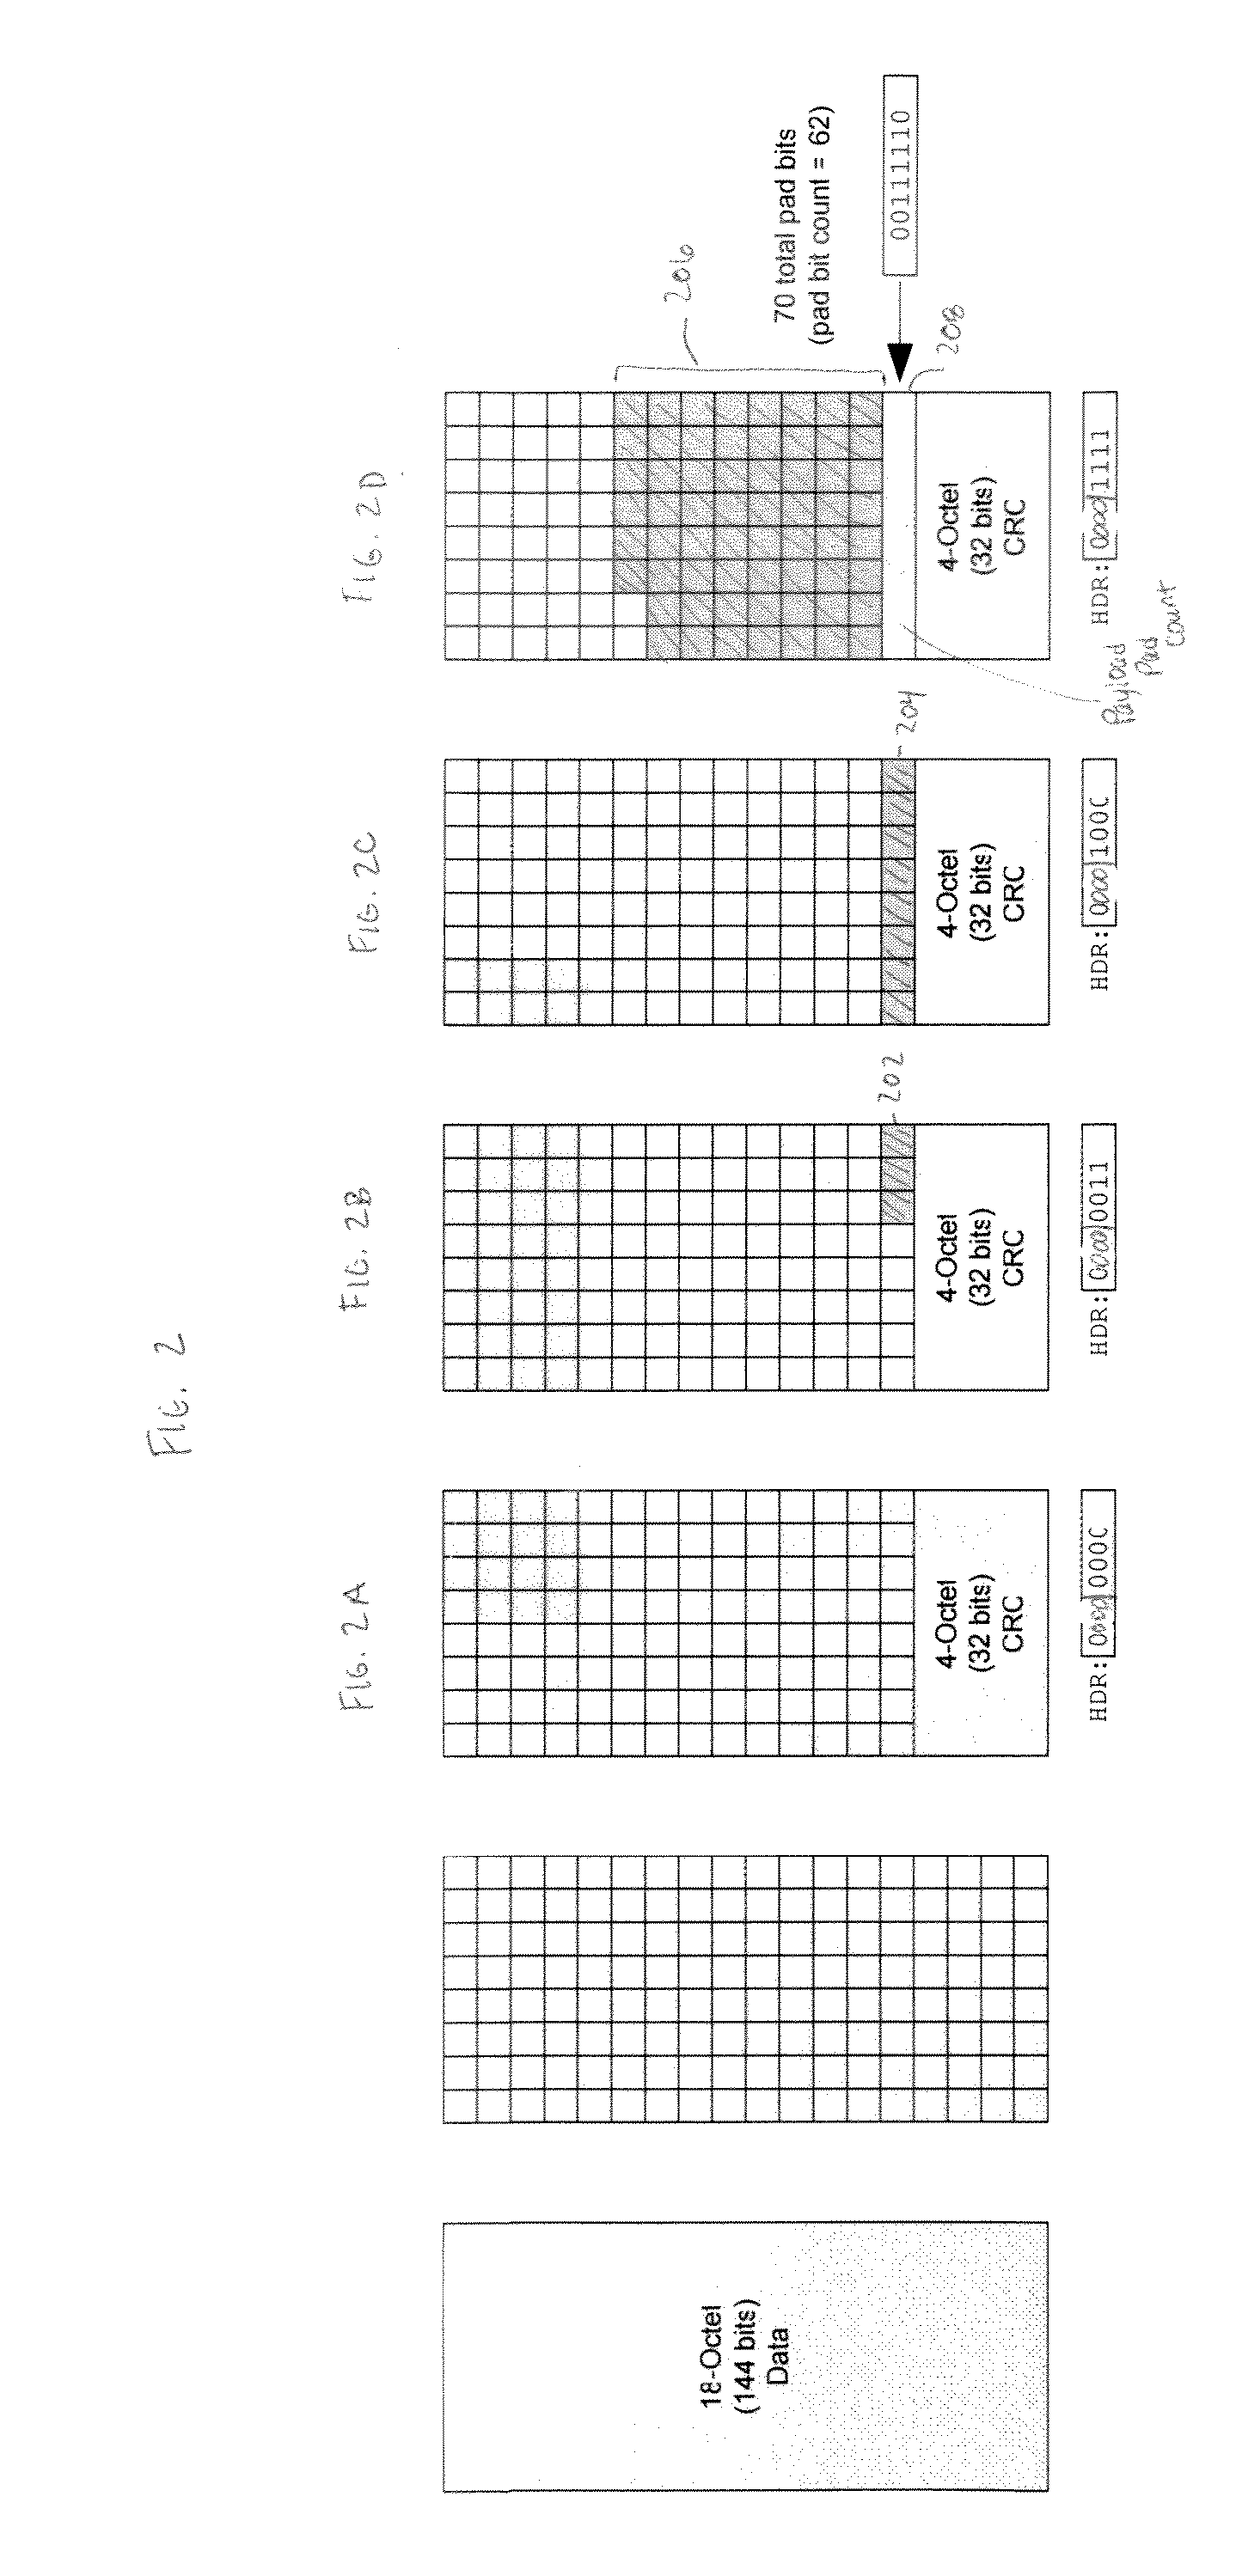 Method for indicating padding in a digital mobile radio system